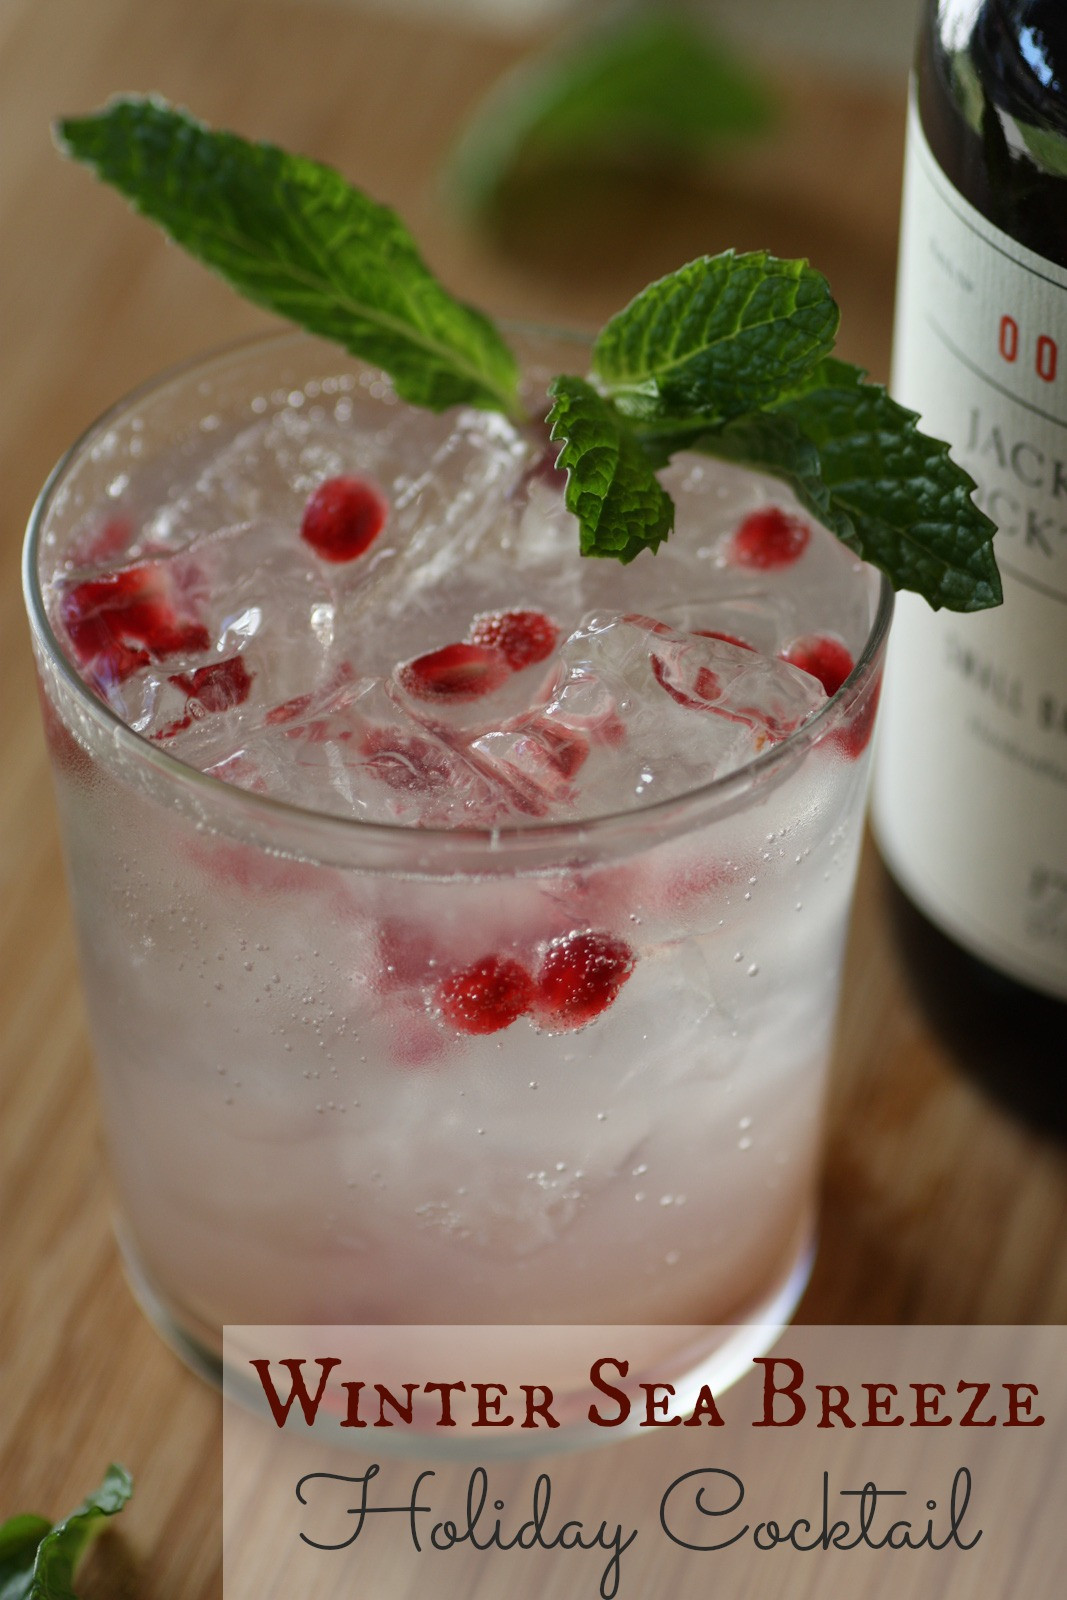 Holiday Party Drink Ideas
 Make This Delicious Winter Sea Breeze Holiday Cocktail